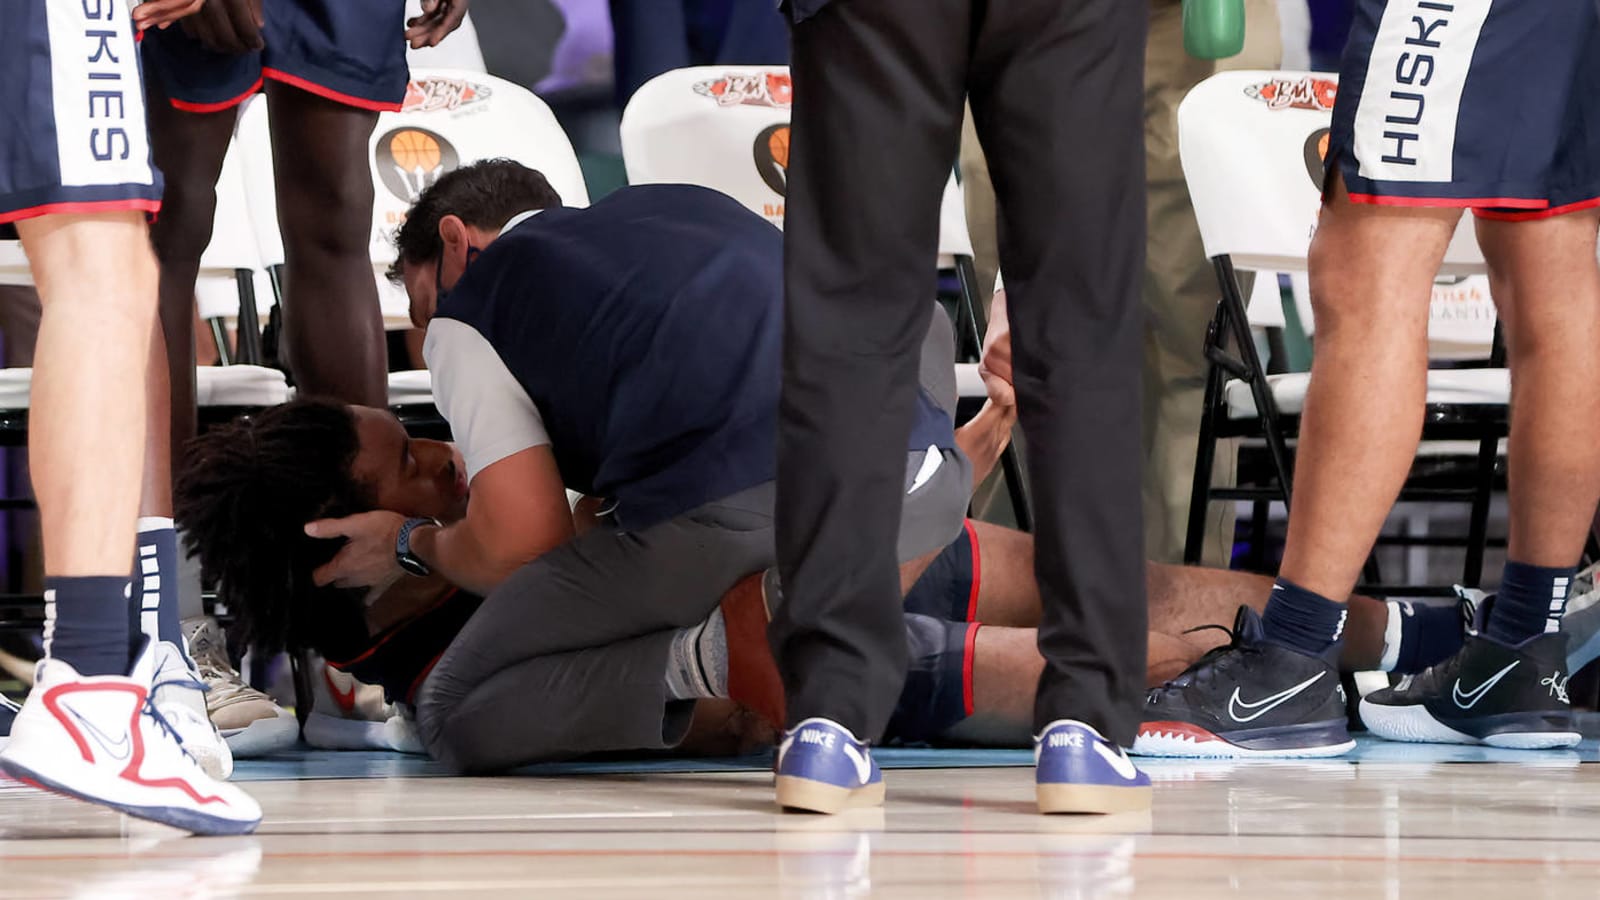 UConn's Isaiah Whaley fainted on bench at end of game